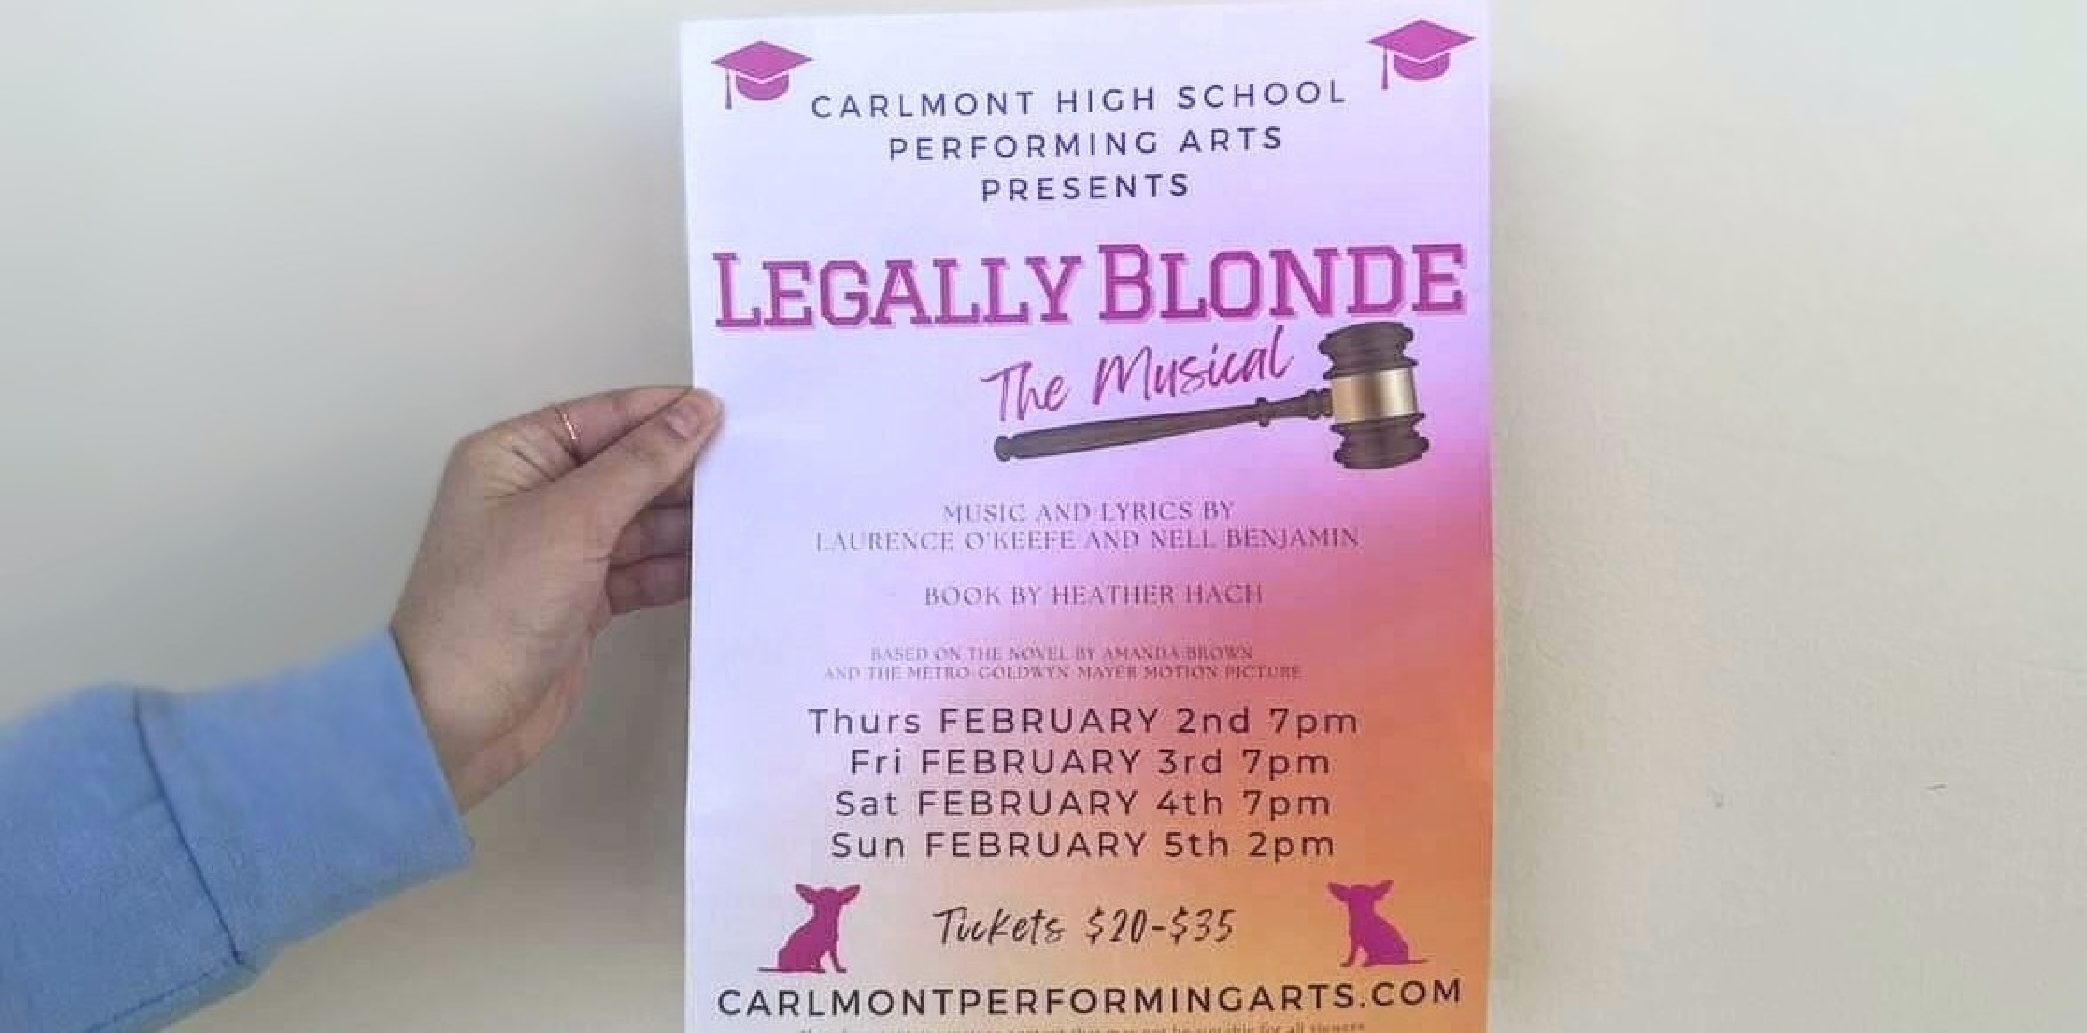 Posters for the upcoming musical are being posted around campus.